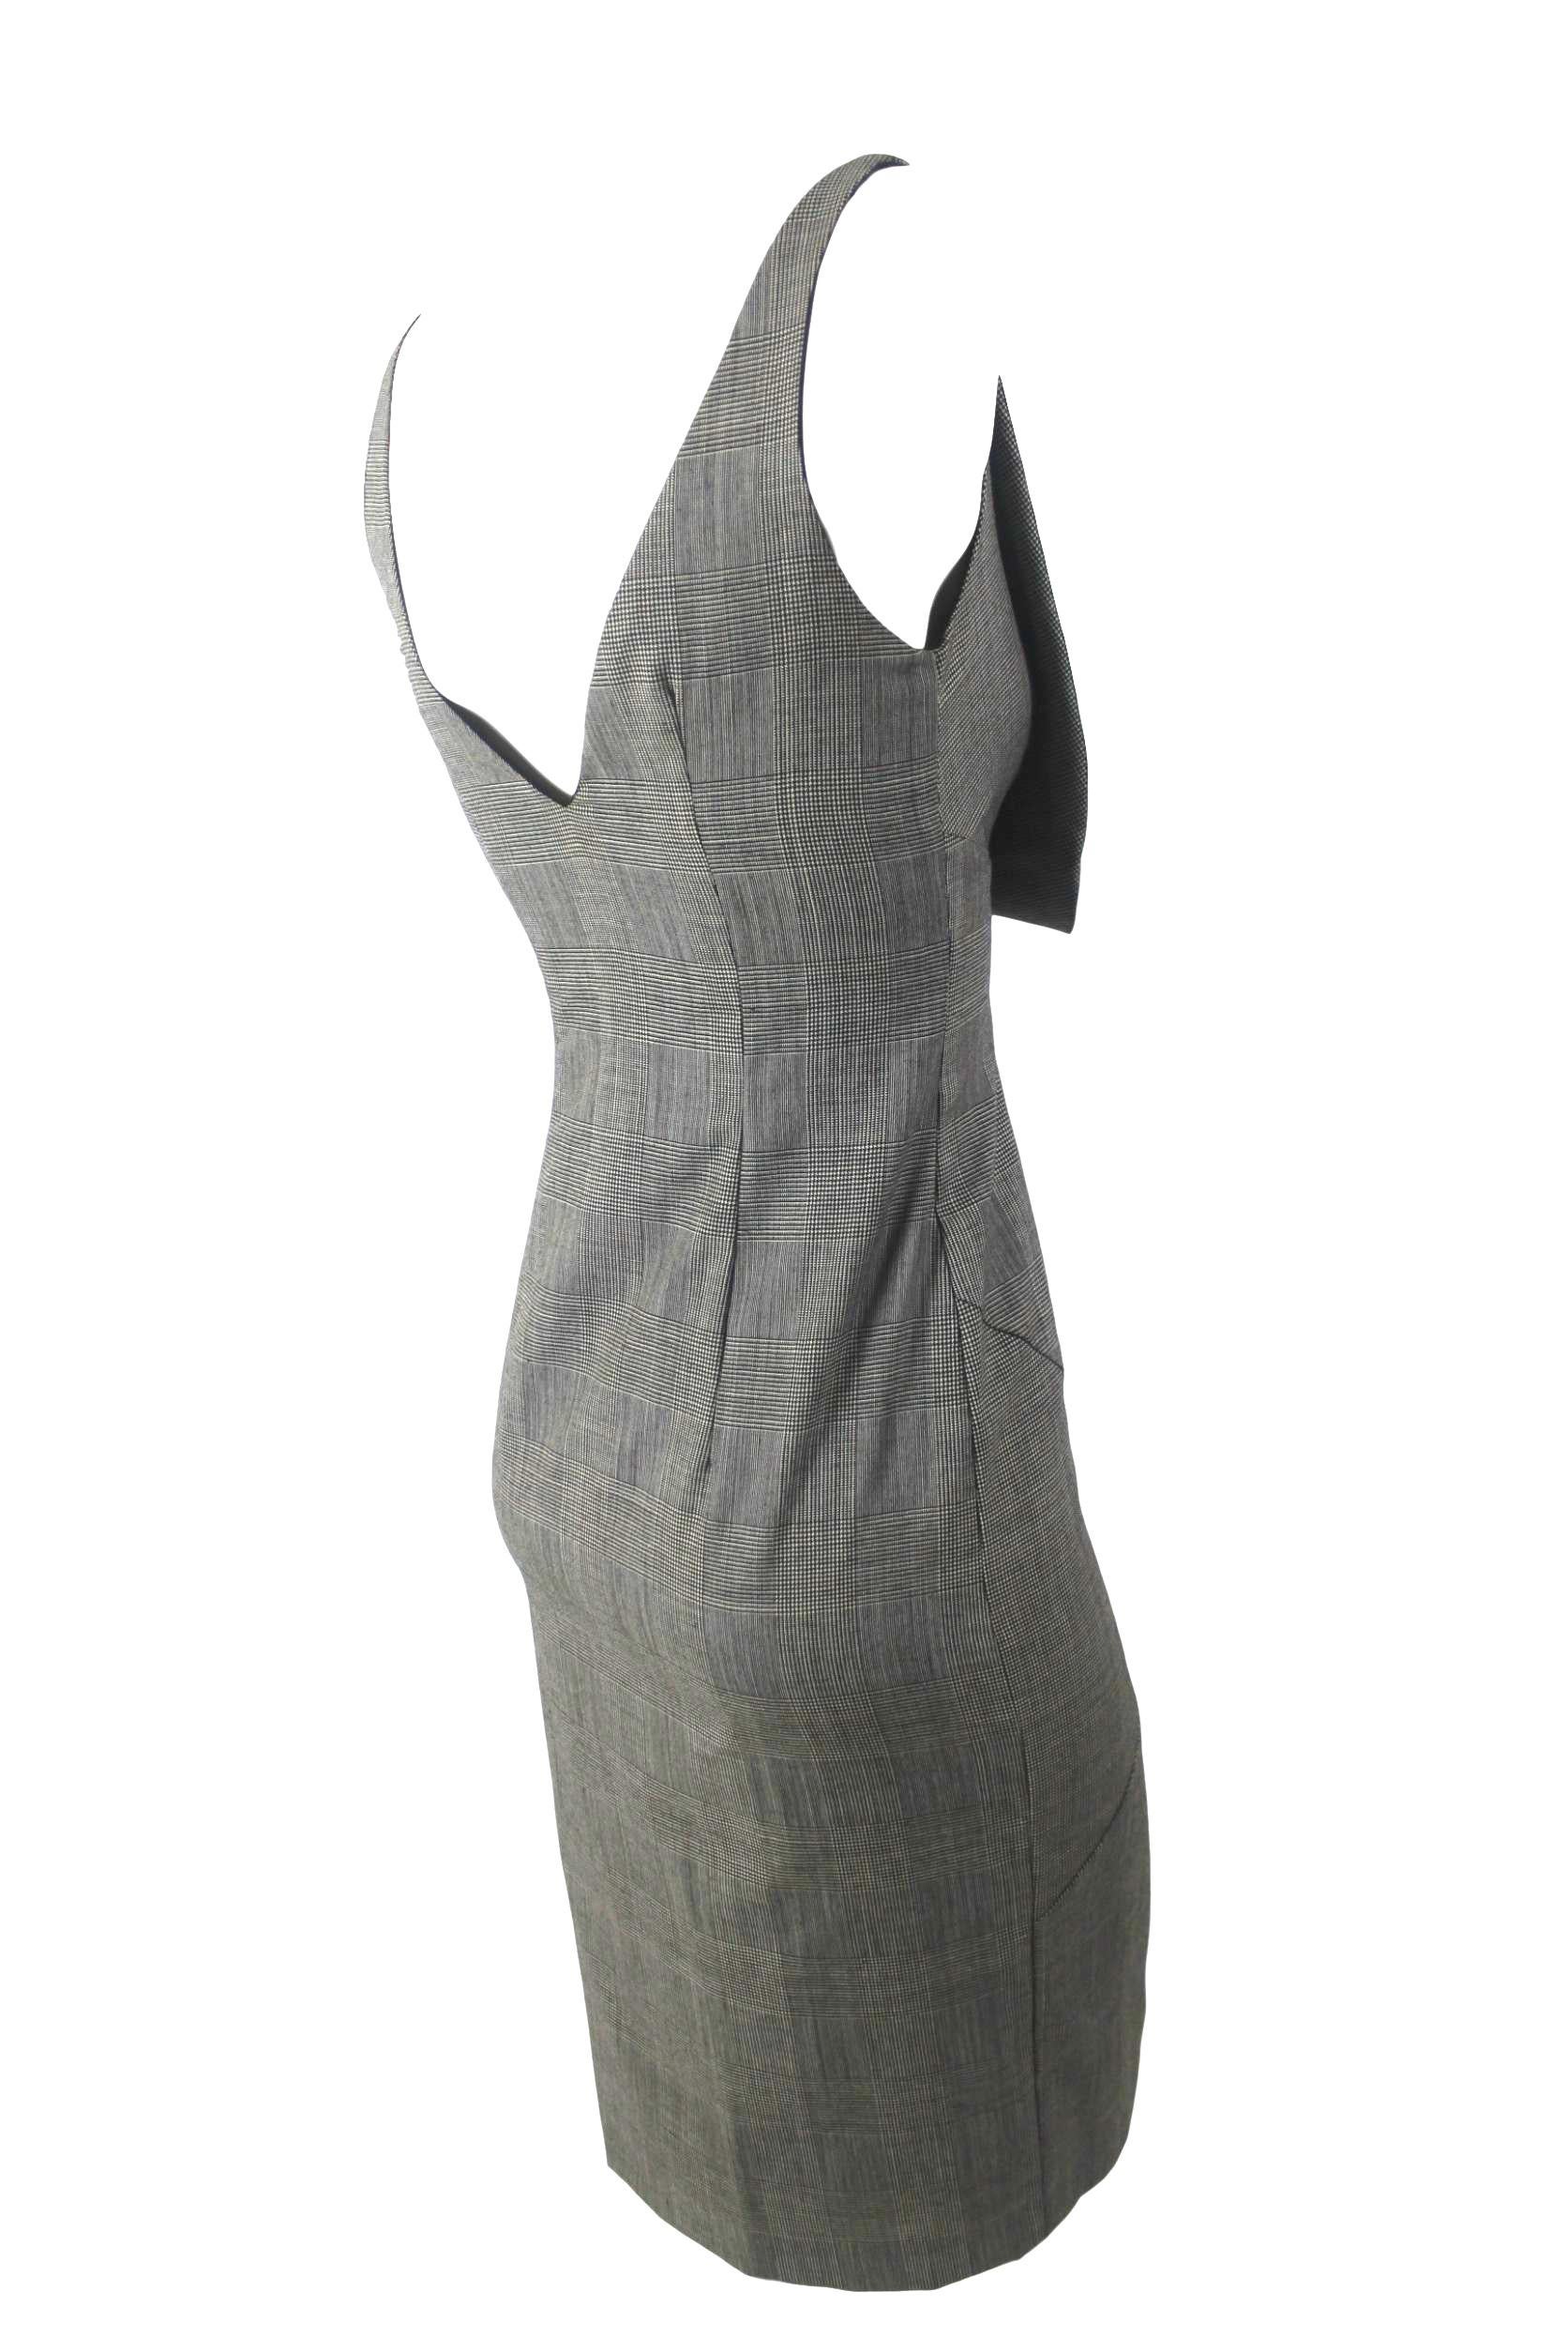 Alexander McQueen 1998 Collection Fitted Dress For Sale 3